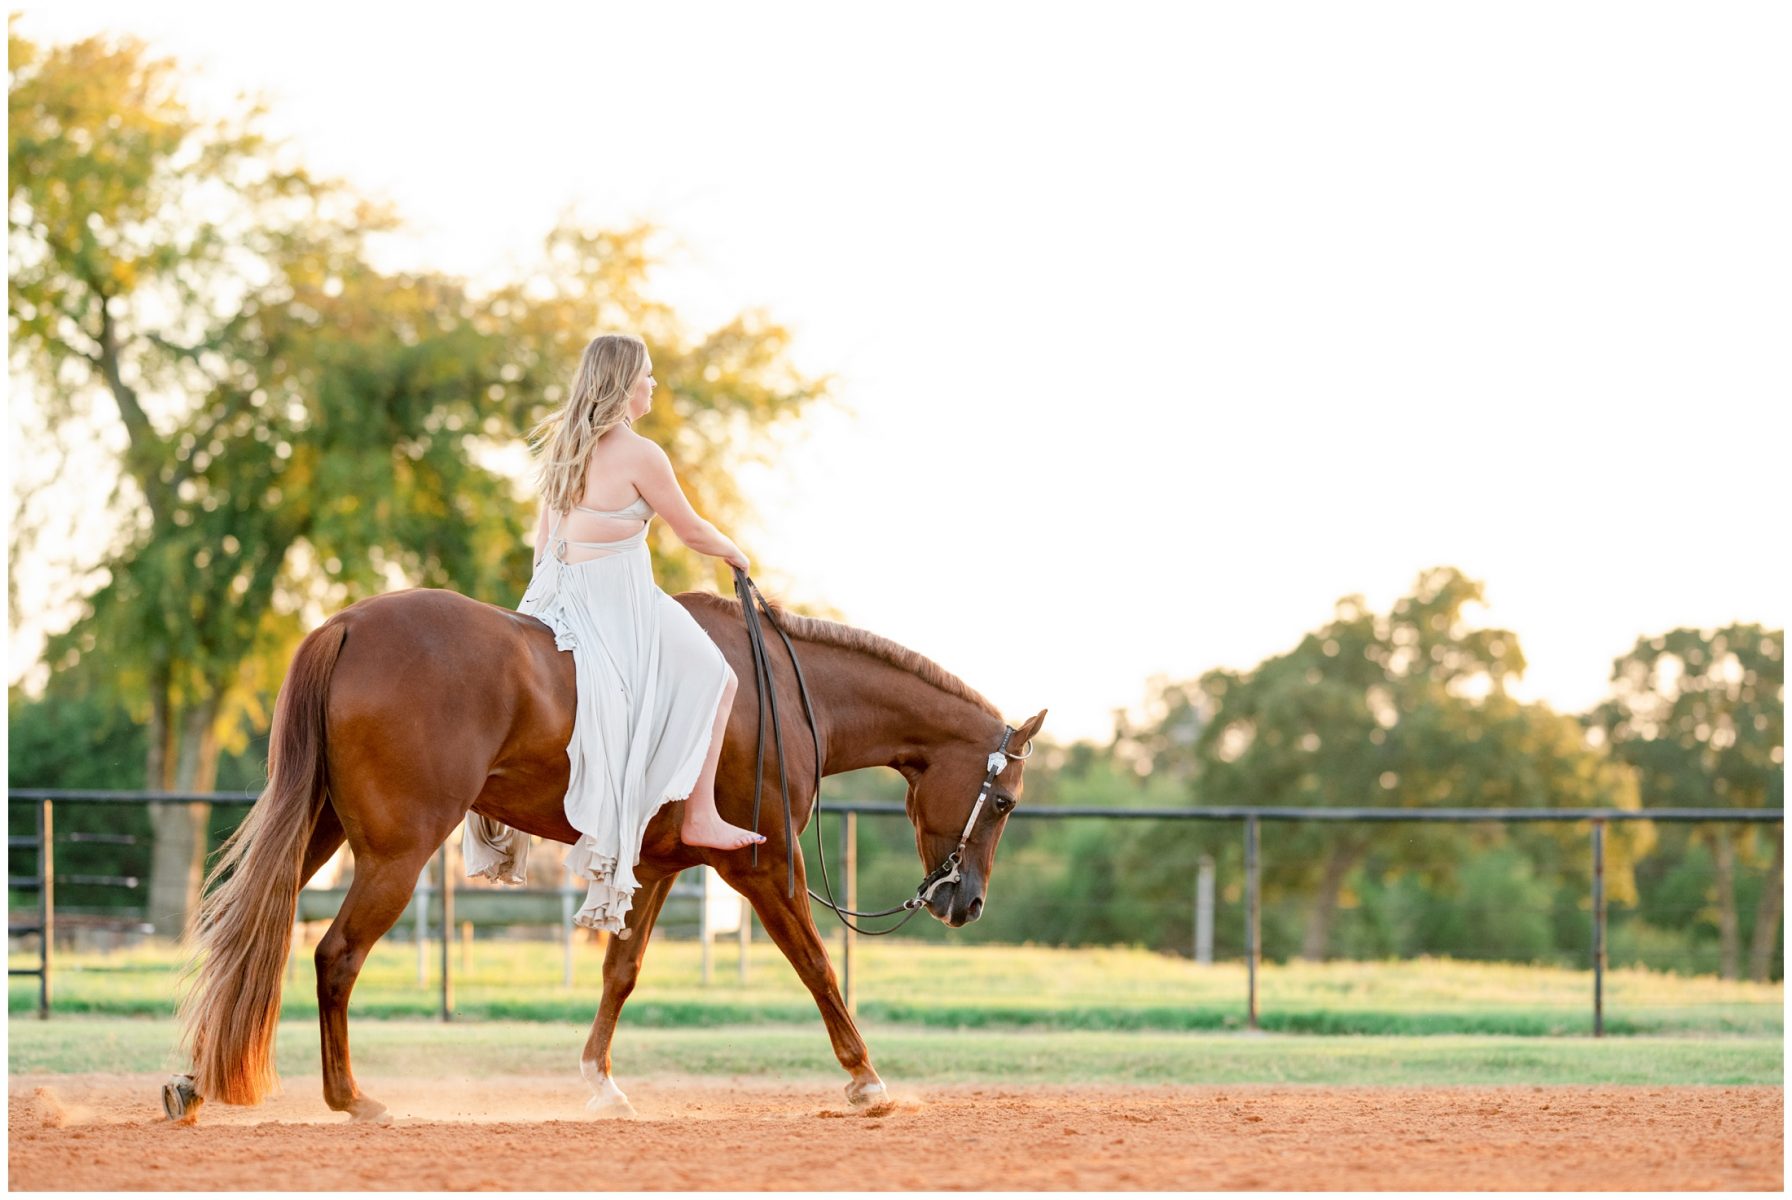 http://kirstiemarie.com/wp-content/uploads/2019/10/Millie-Anderson-and-Only-After-You-Vickery-Performance-Horses-Pilot-Point-Texas-AQHYA-Kirstie-Marie-Photography_0014-1.jpg